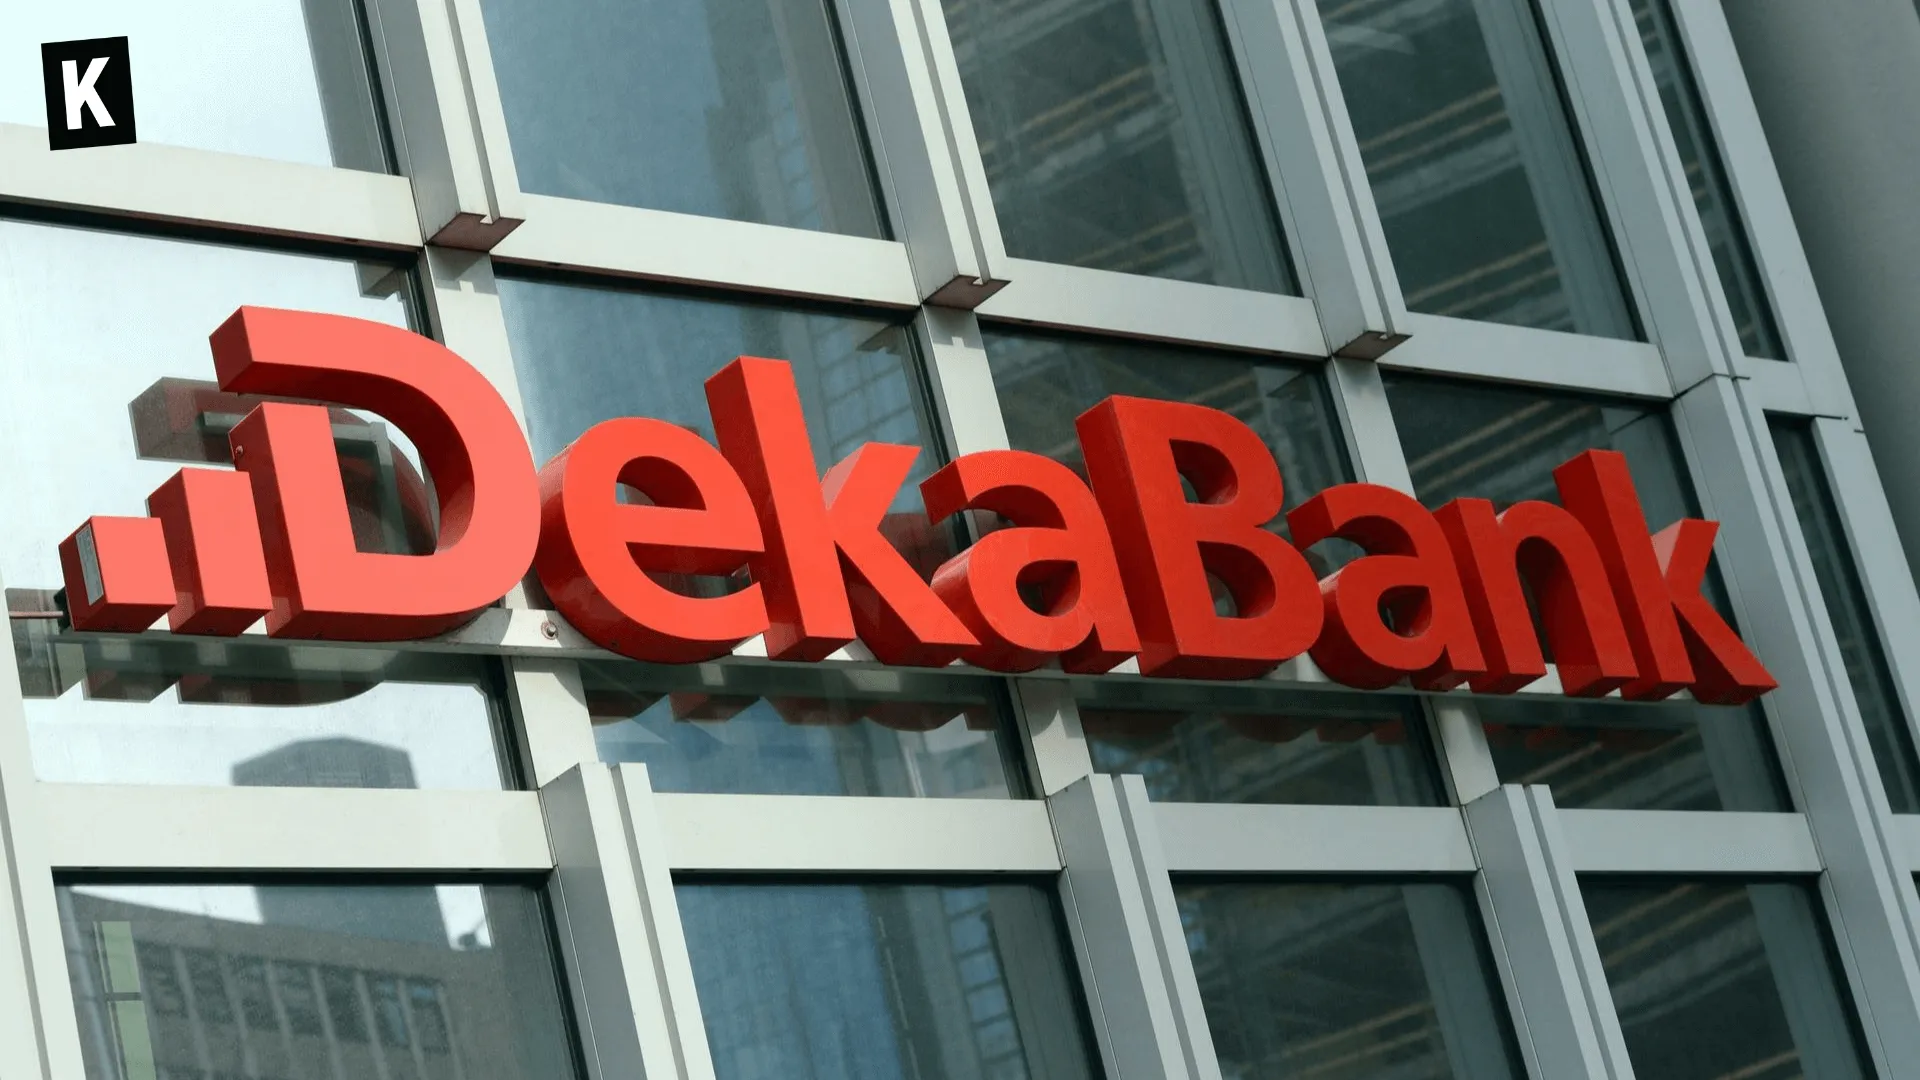 Dekabank sign at the entrance of the bank